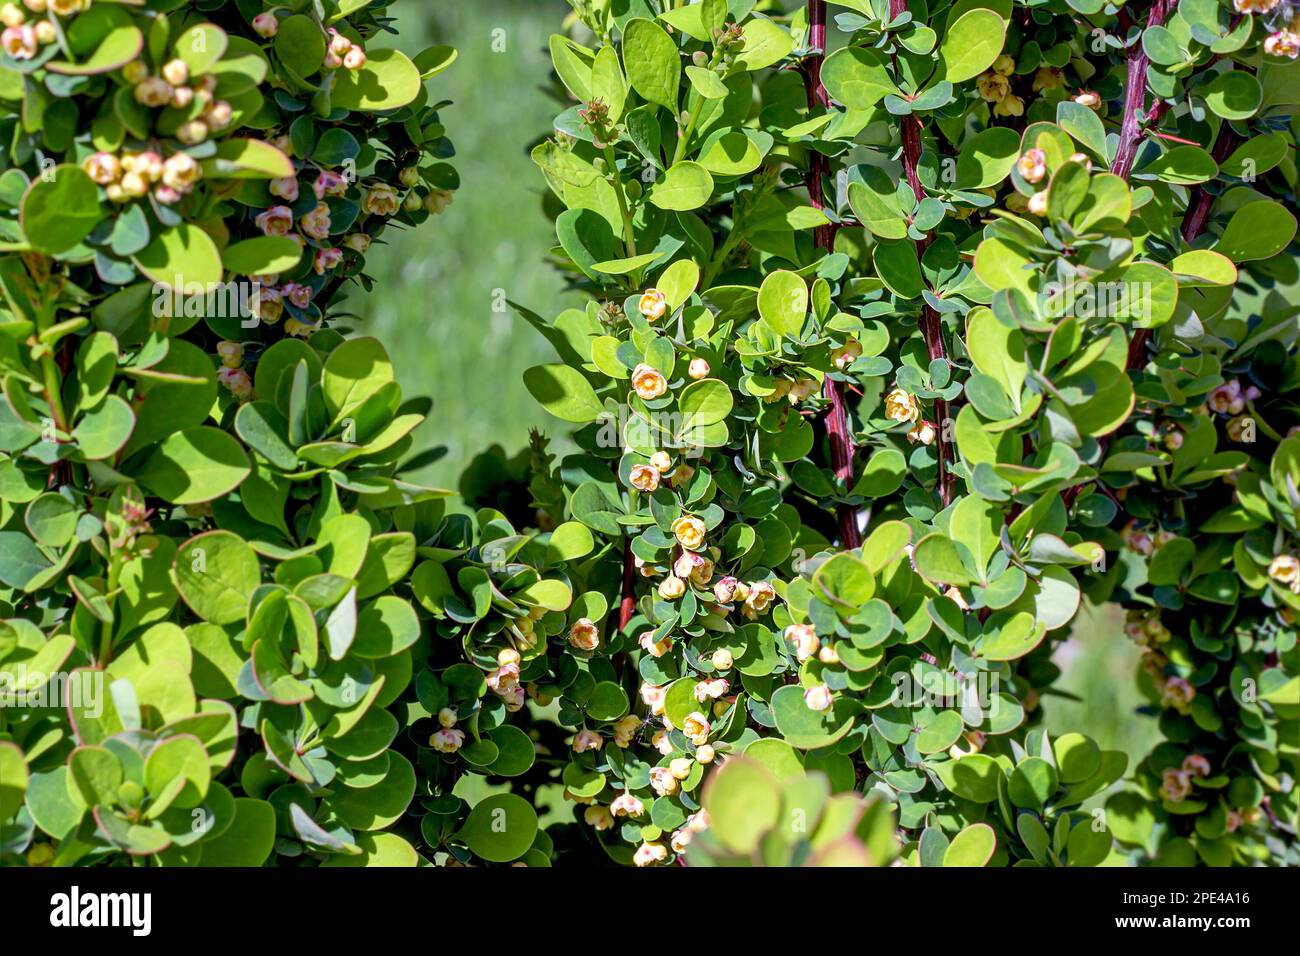 Bright green Thunbergs Barberry (Berberis Thunbergii Erecta) leaves and blooming flowers in the garden in spring. Stock Photo